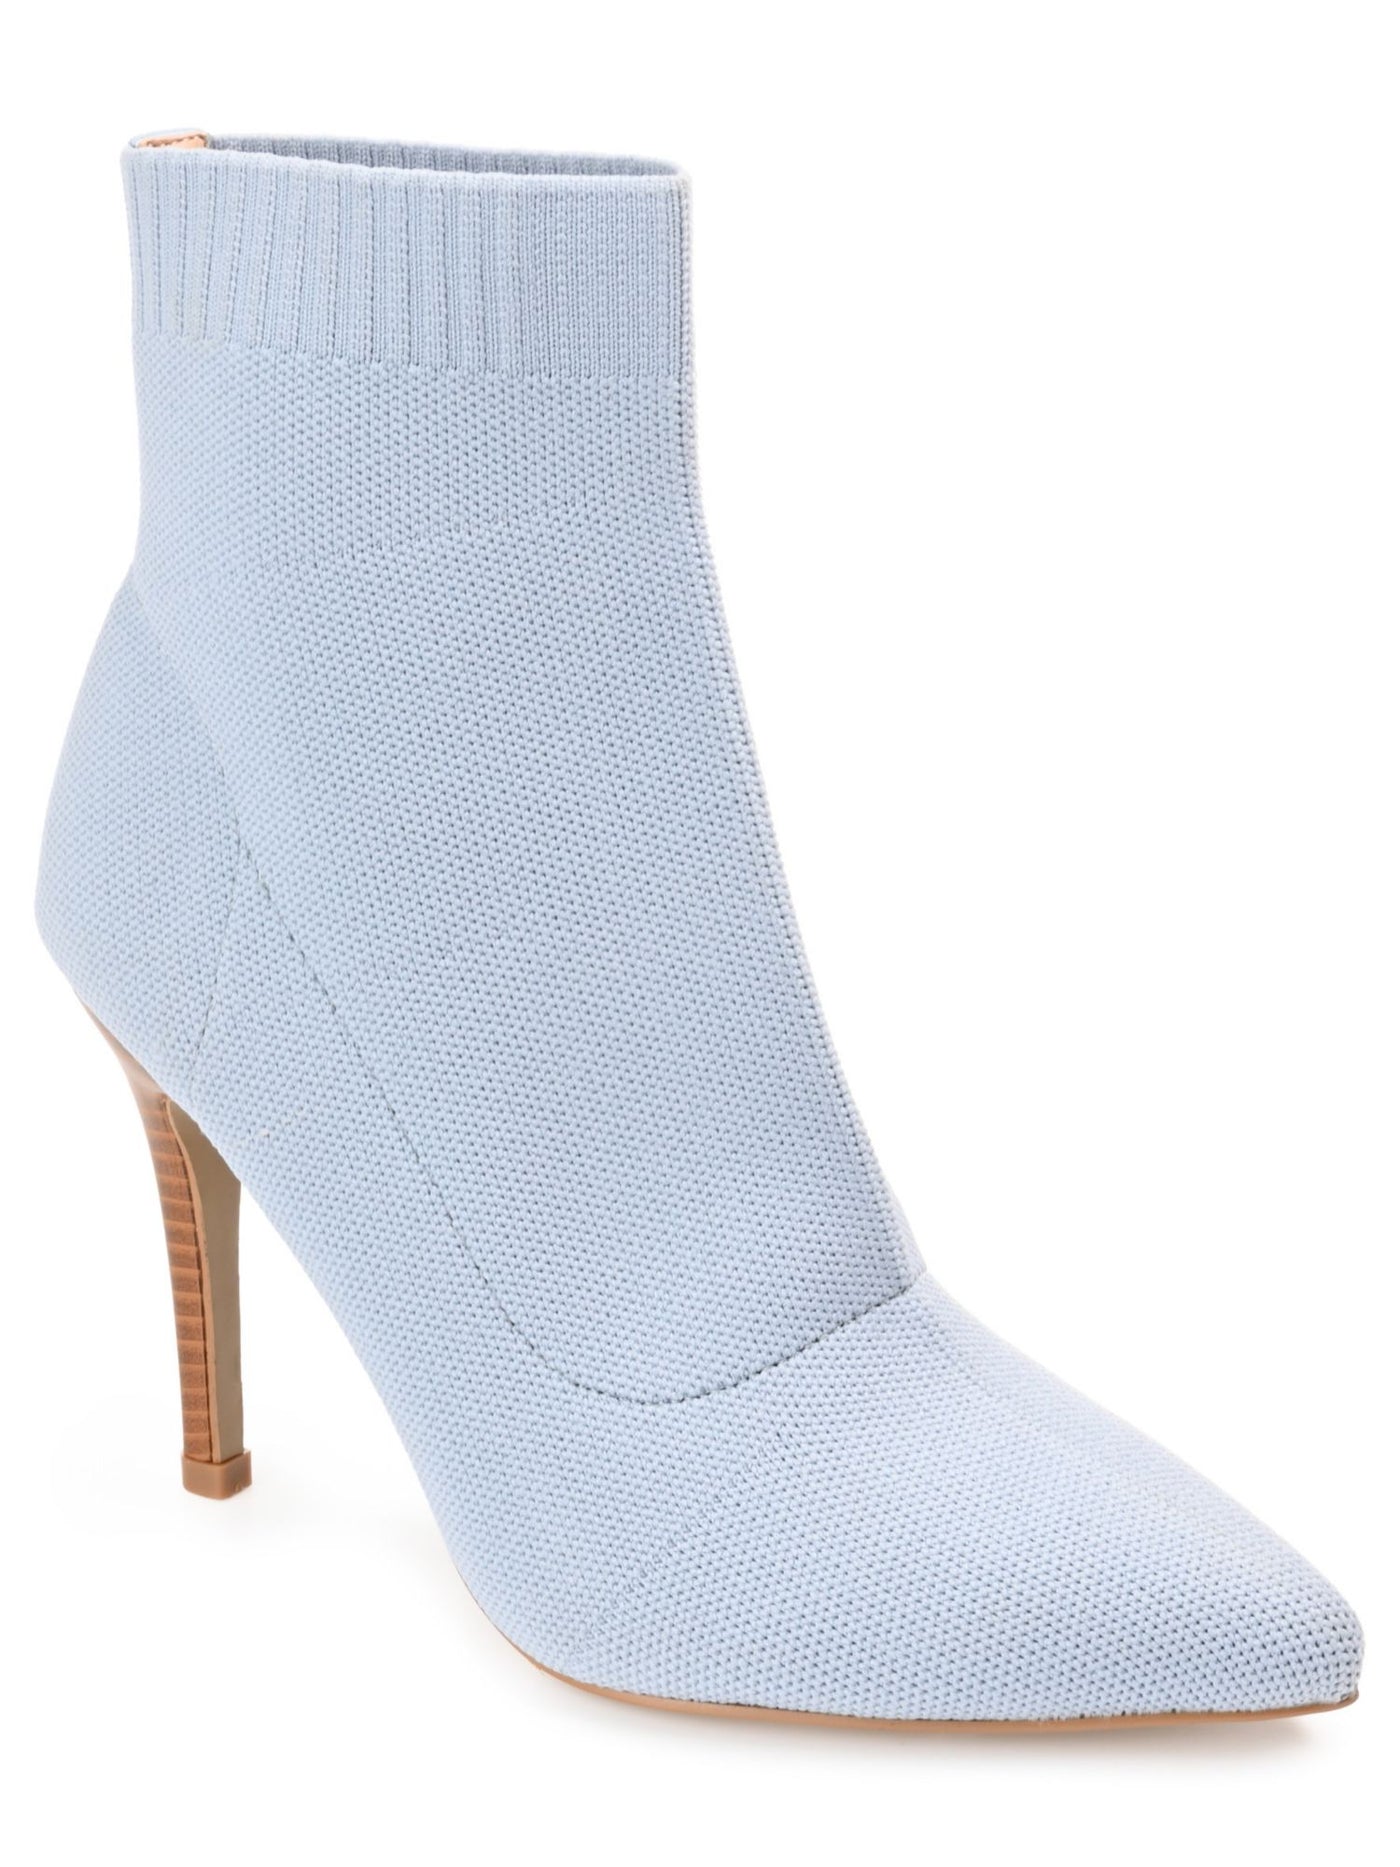 JOURNEE COLLECTION Womens Light Blue Knit Stretch Padded Milyna Pointed Toe Stiletto Booties 11